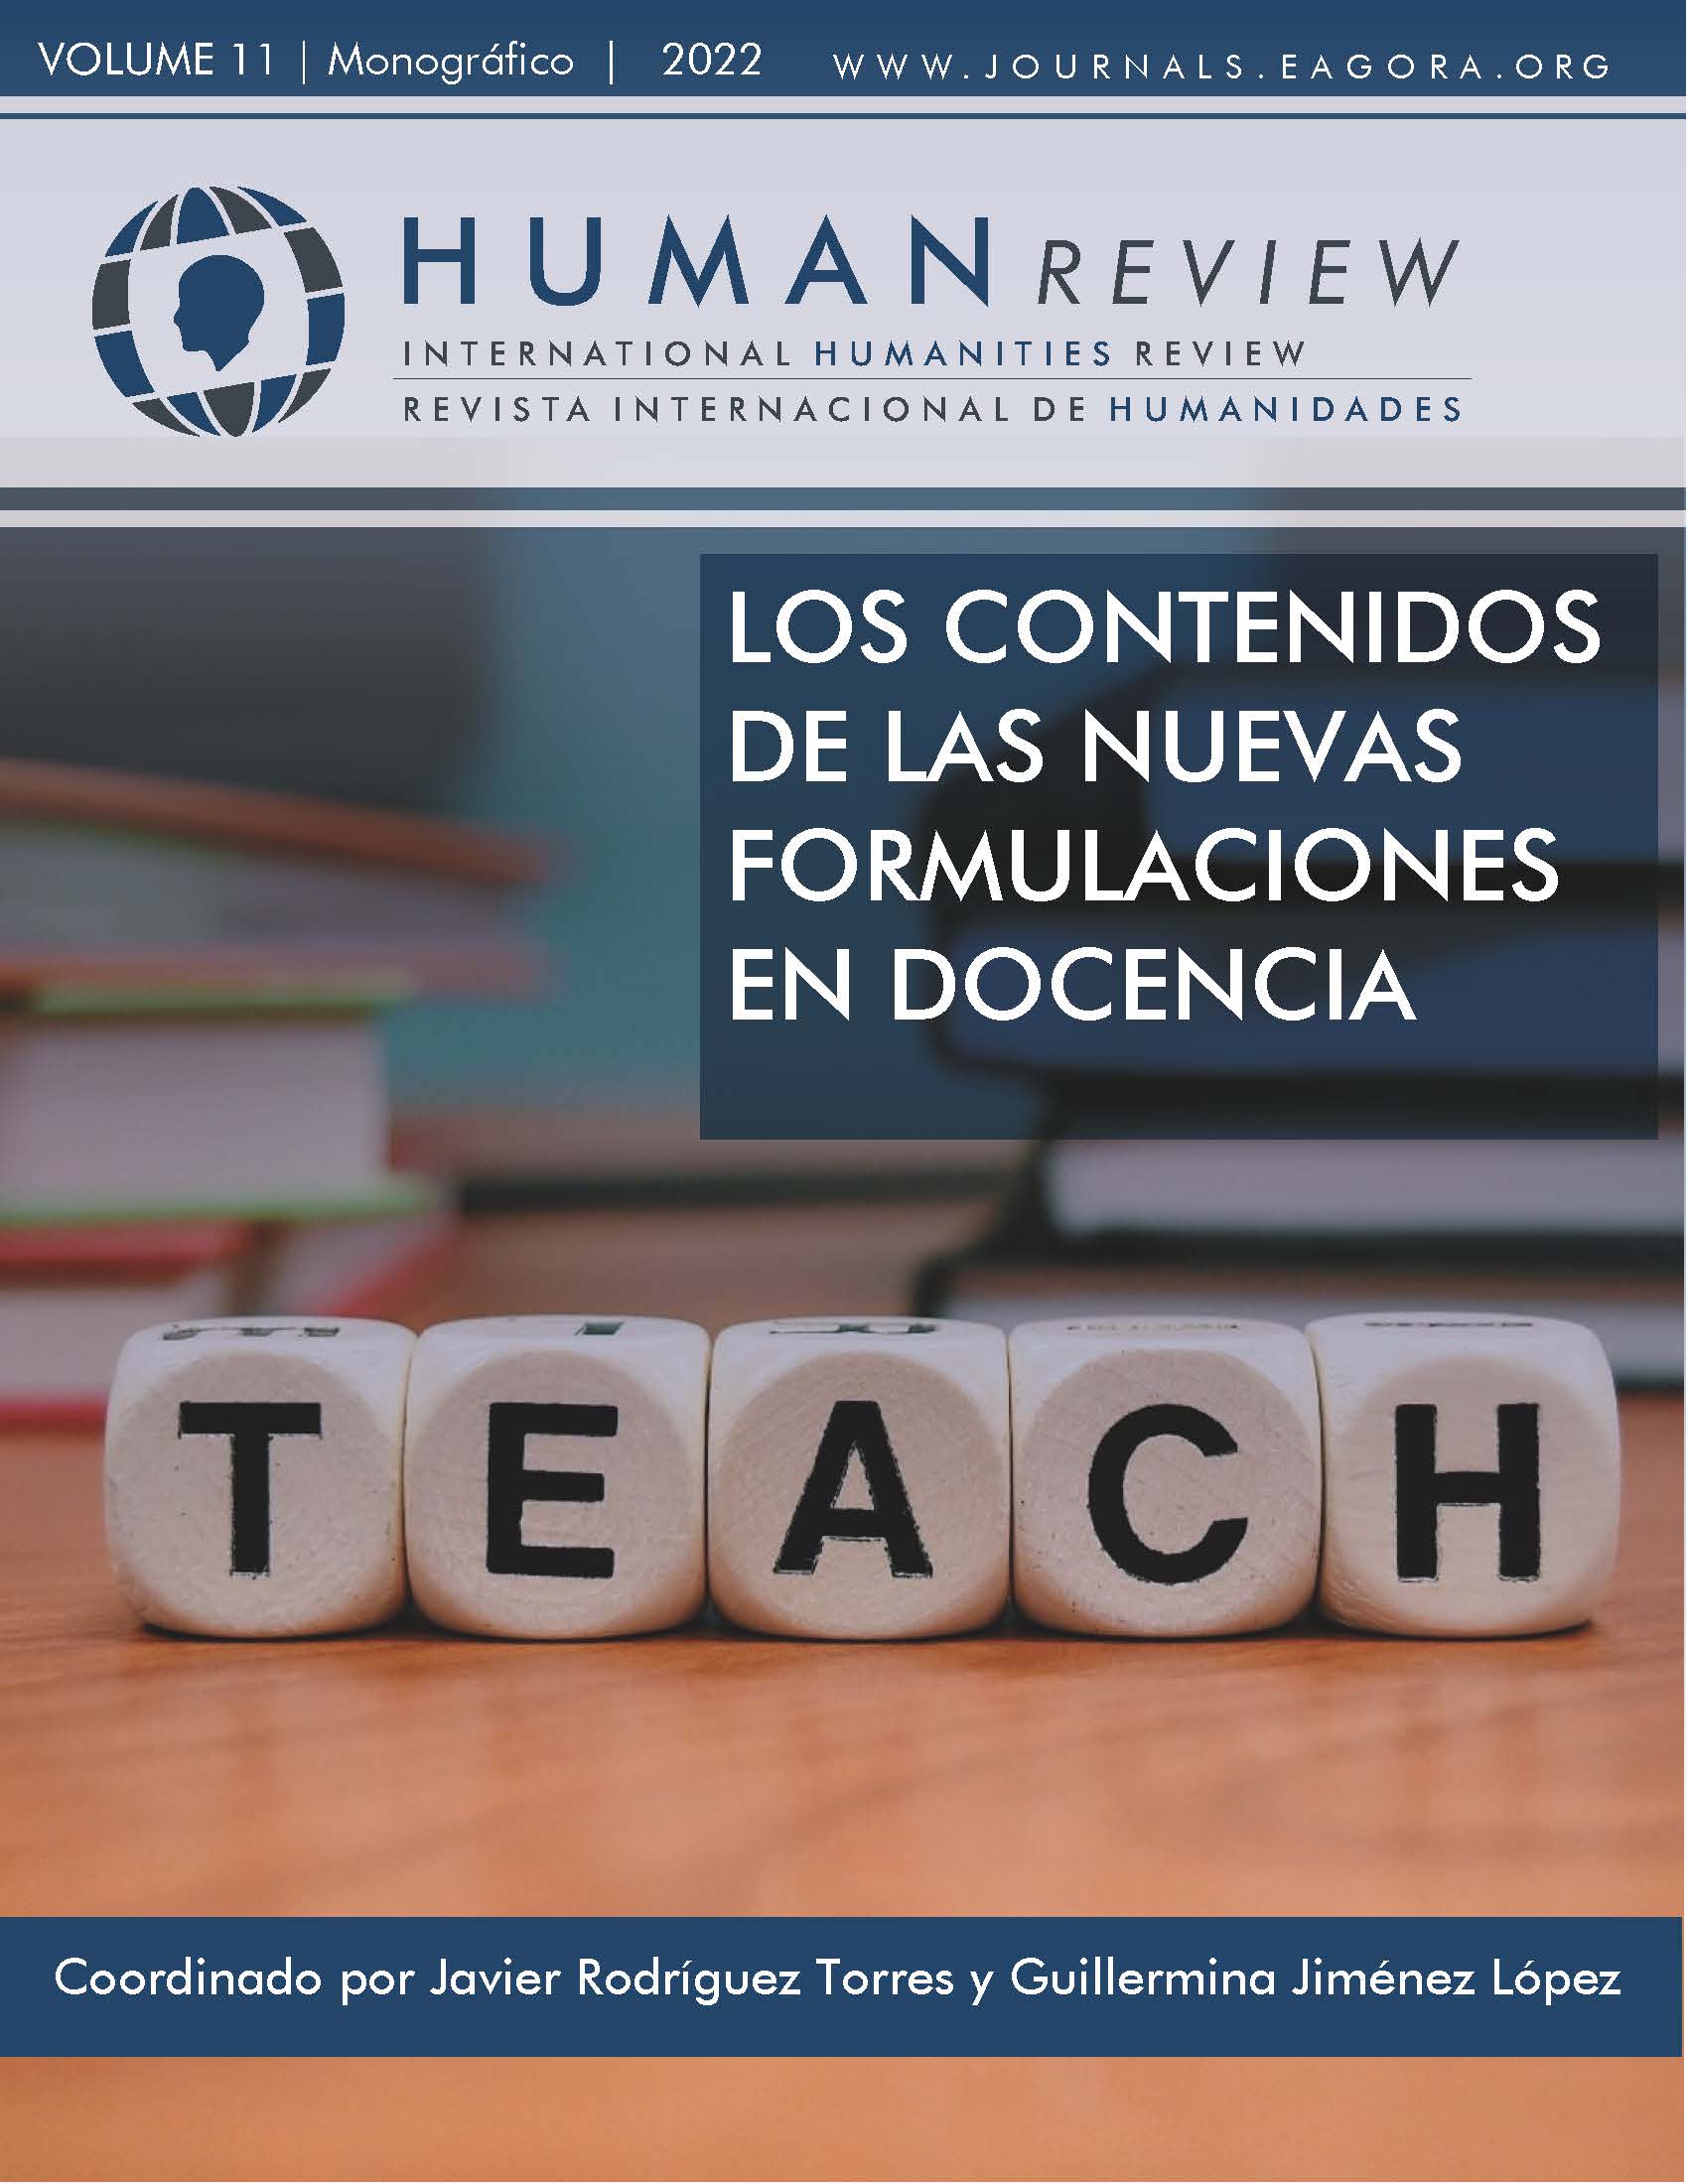 					View Vol. 11 No. 3 (2022): Monograph: "Contents of New Teaching Formulations"
				